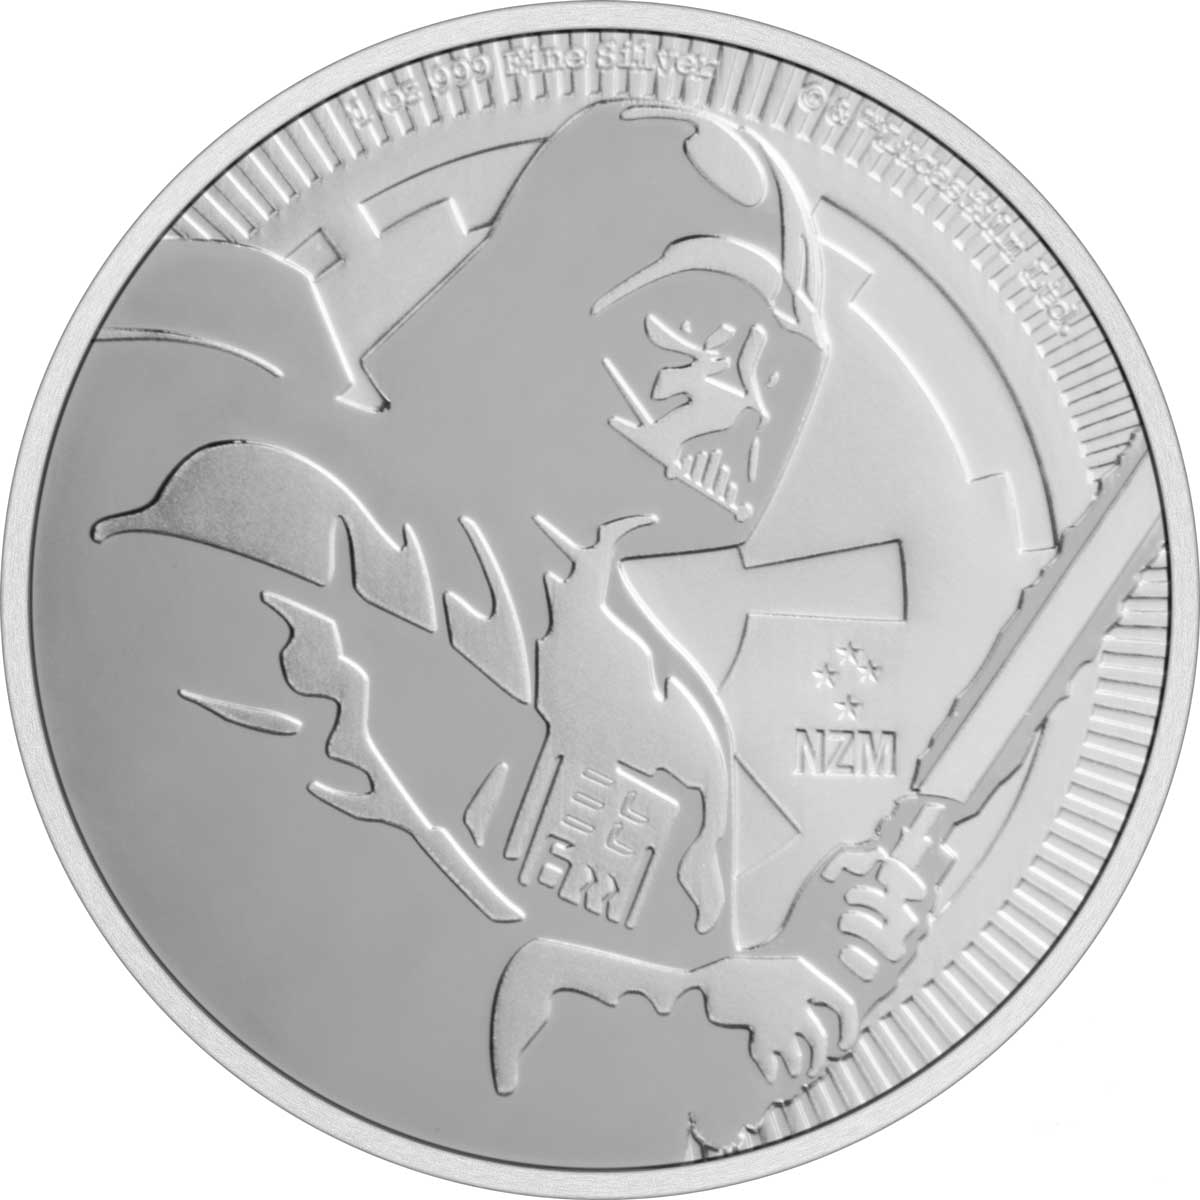 with original Mint packaging and COA $2 Brilliant Uncirculated 2017 NU Disney Star Wars Han Solo Ultra High Relief Silver Coin 2 oz 